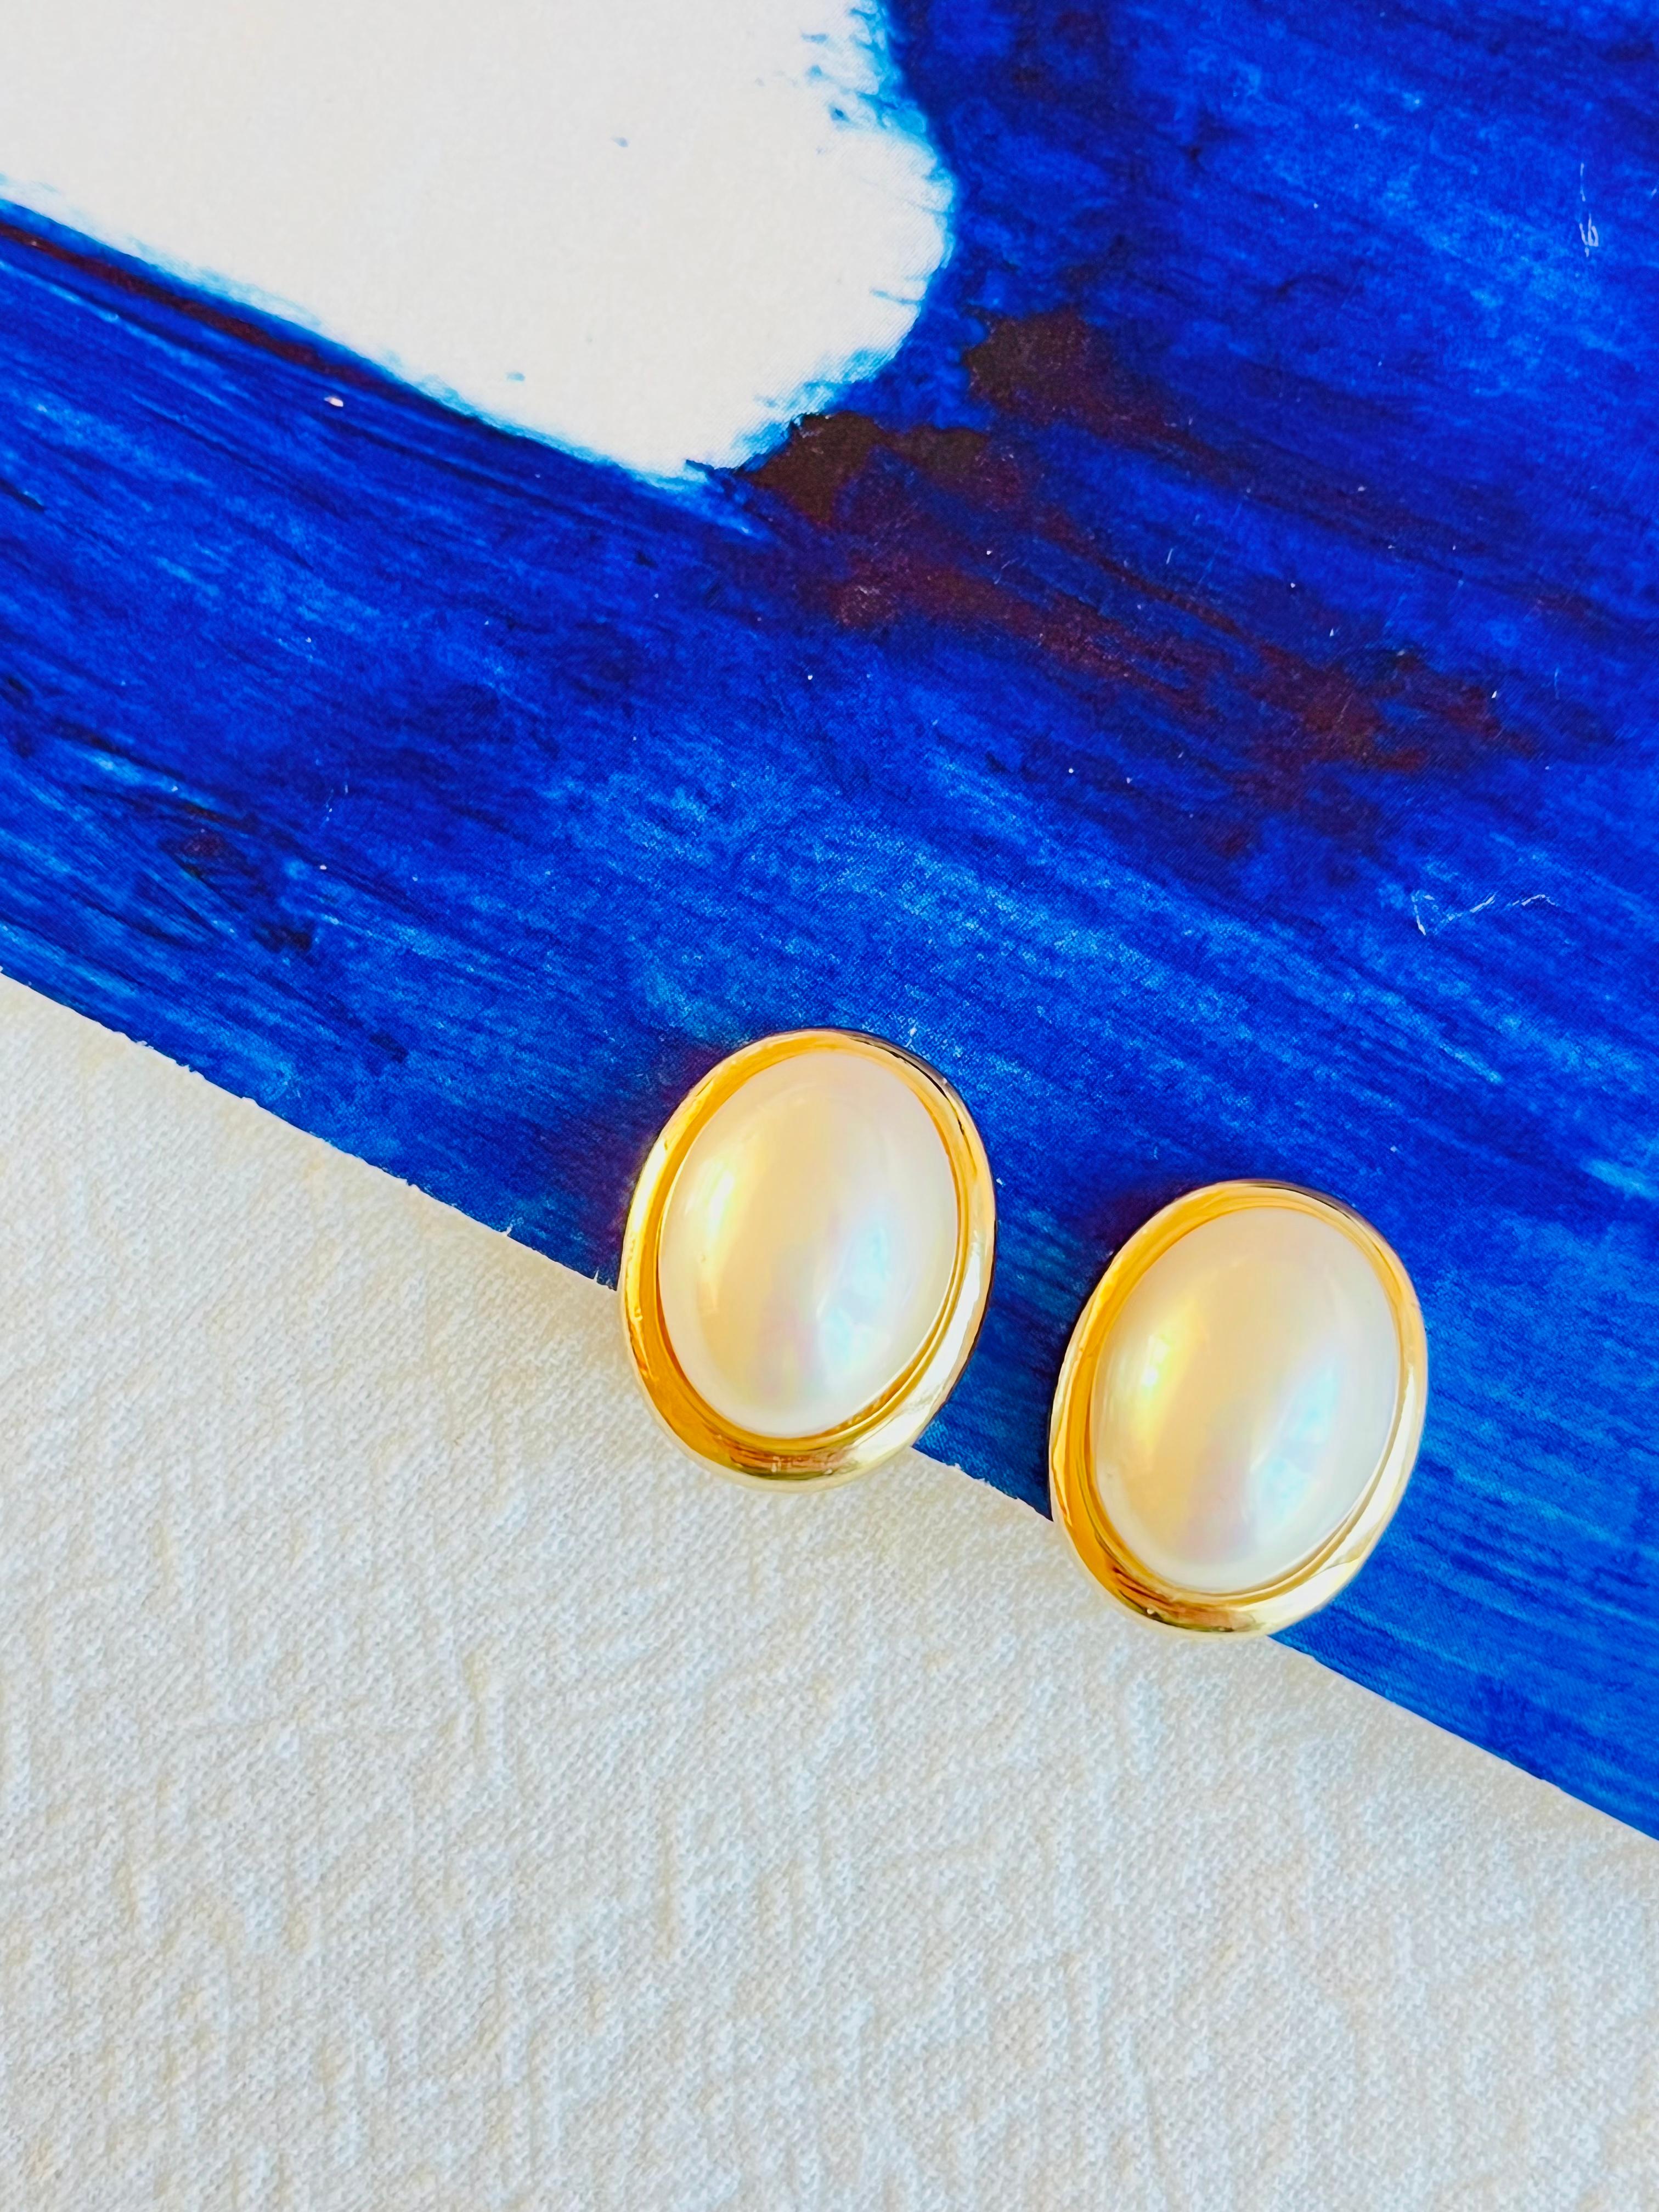 Very good condition. 100% Genuine.

A very beautiful pair of faux pearl earrings by Chr. DIOR, signed at the back.

Size: 1.7*1.2 cm.

Weight: 4.0 g/each.

_ _ _

Great for everyday wear. Come with velvet pouch and beautiful package.

Makes the